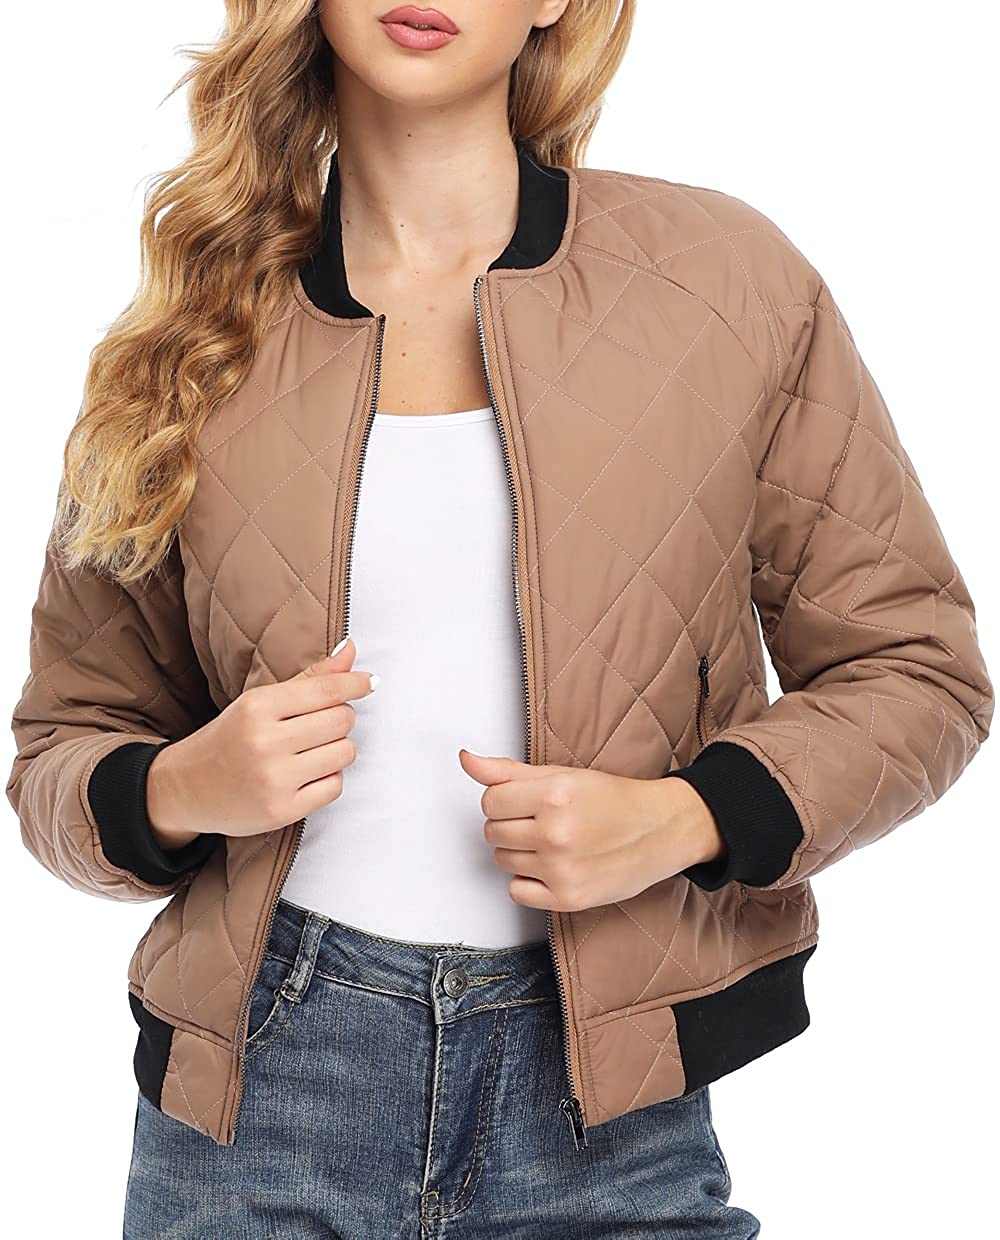 Dilgul Womens Quilted Jacket Lightweight Long Sleeves Zip Up Raglan Bomber Jackets with Pockets 